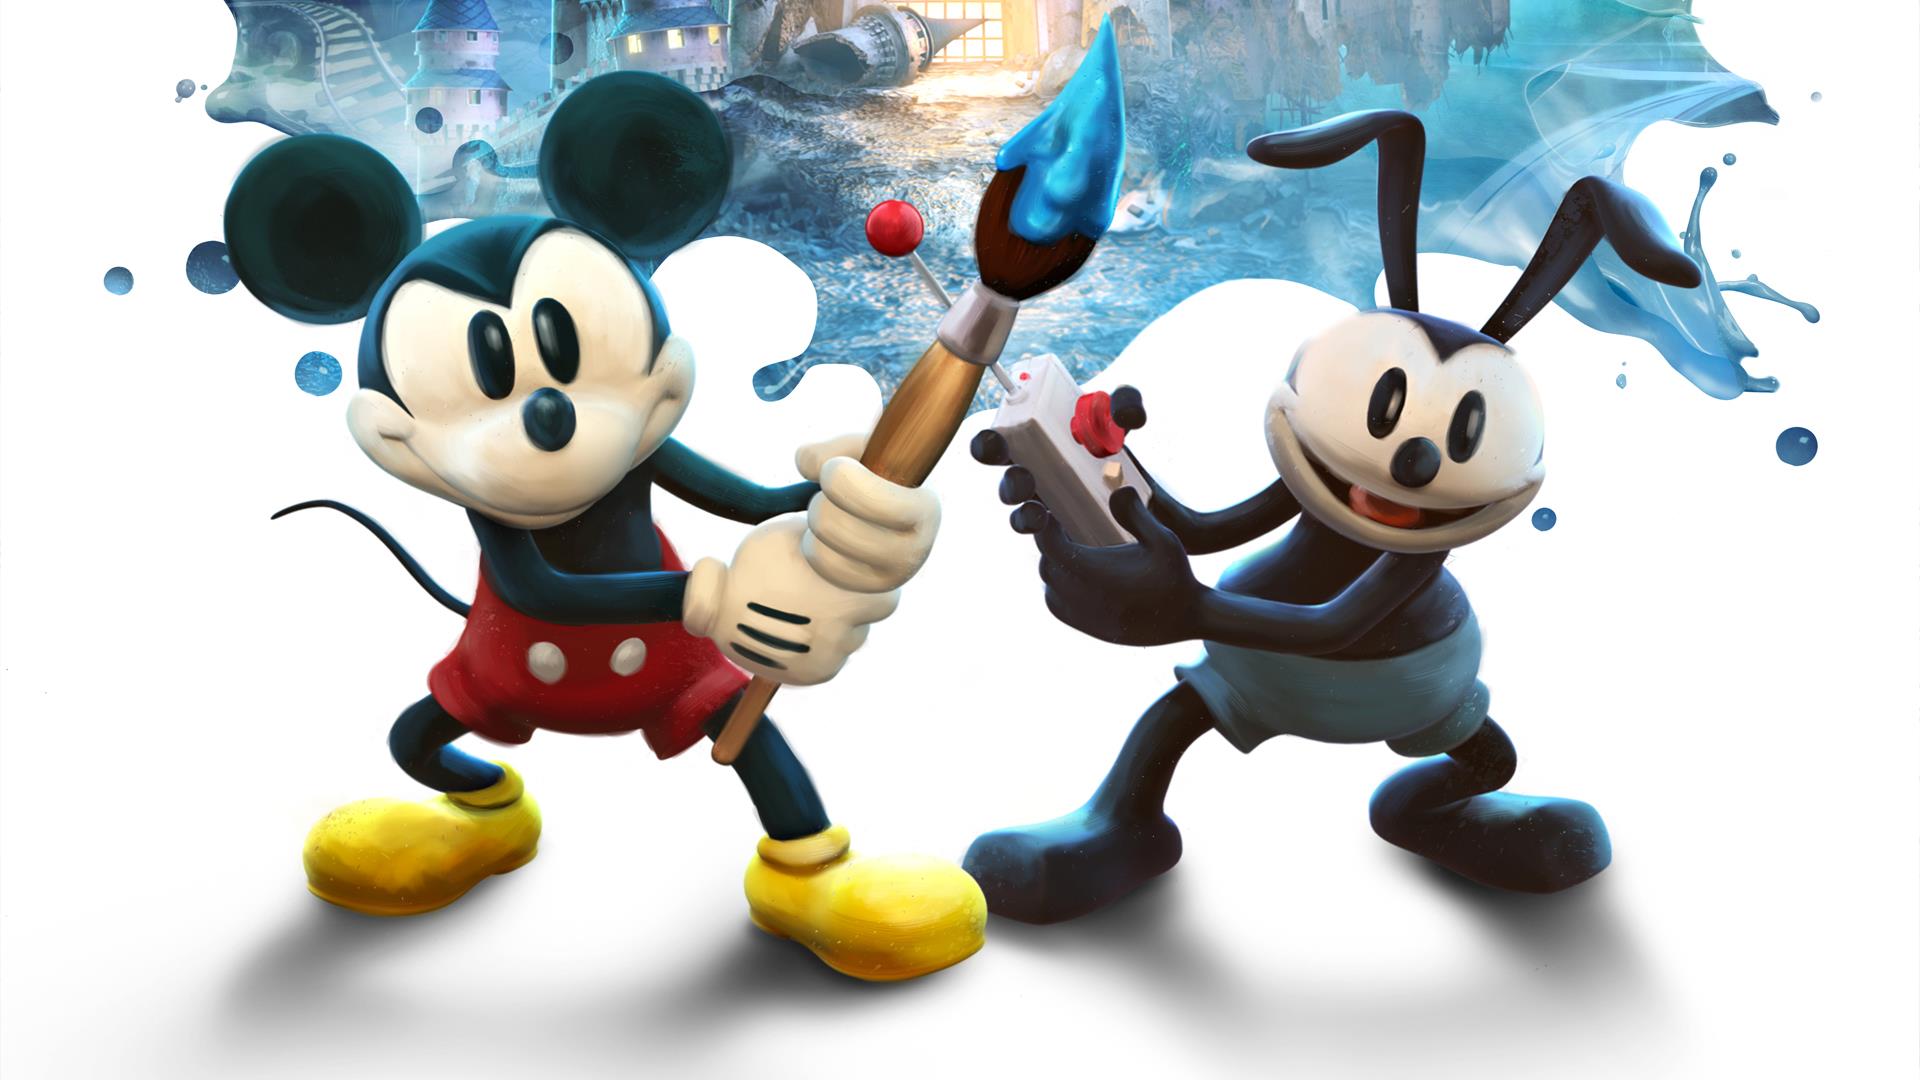 Wallpaper Of Epic Mickey You Are Ing